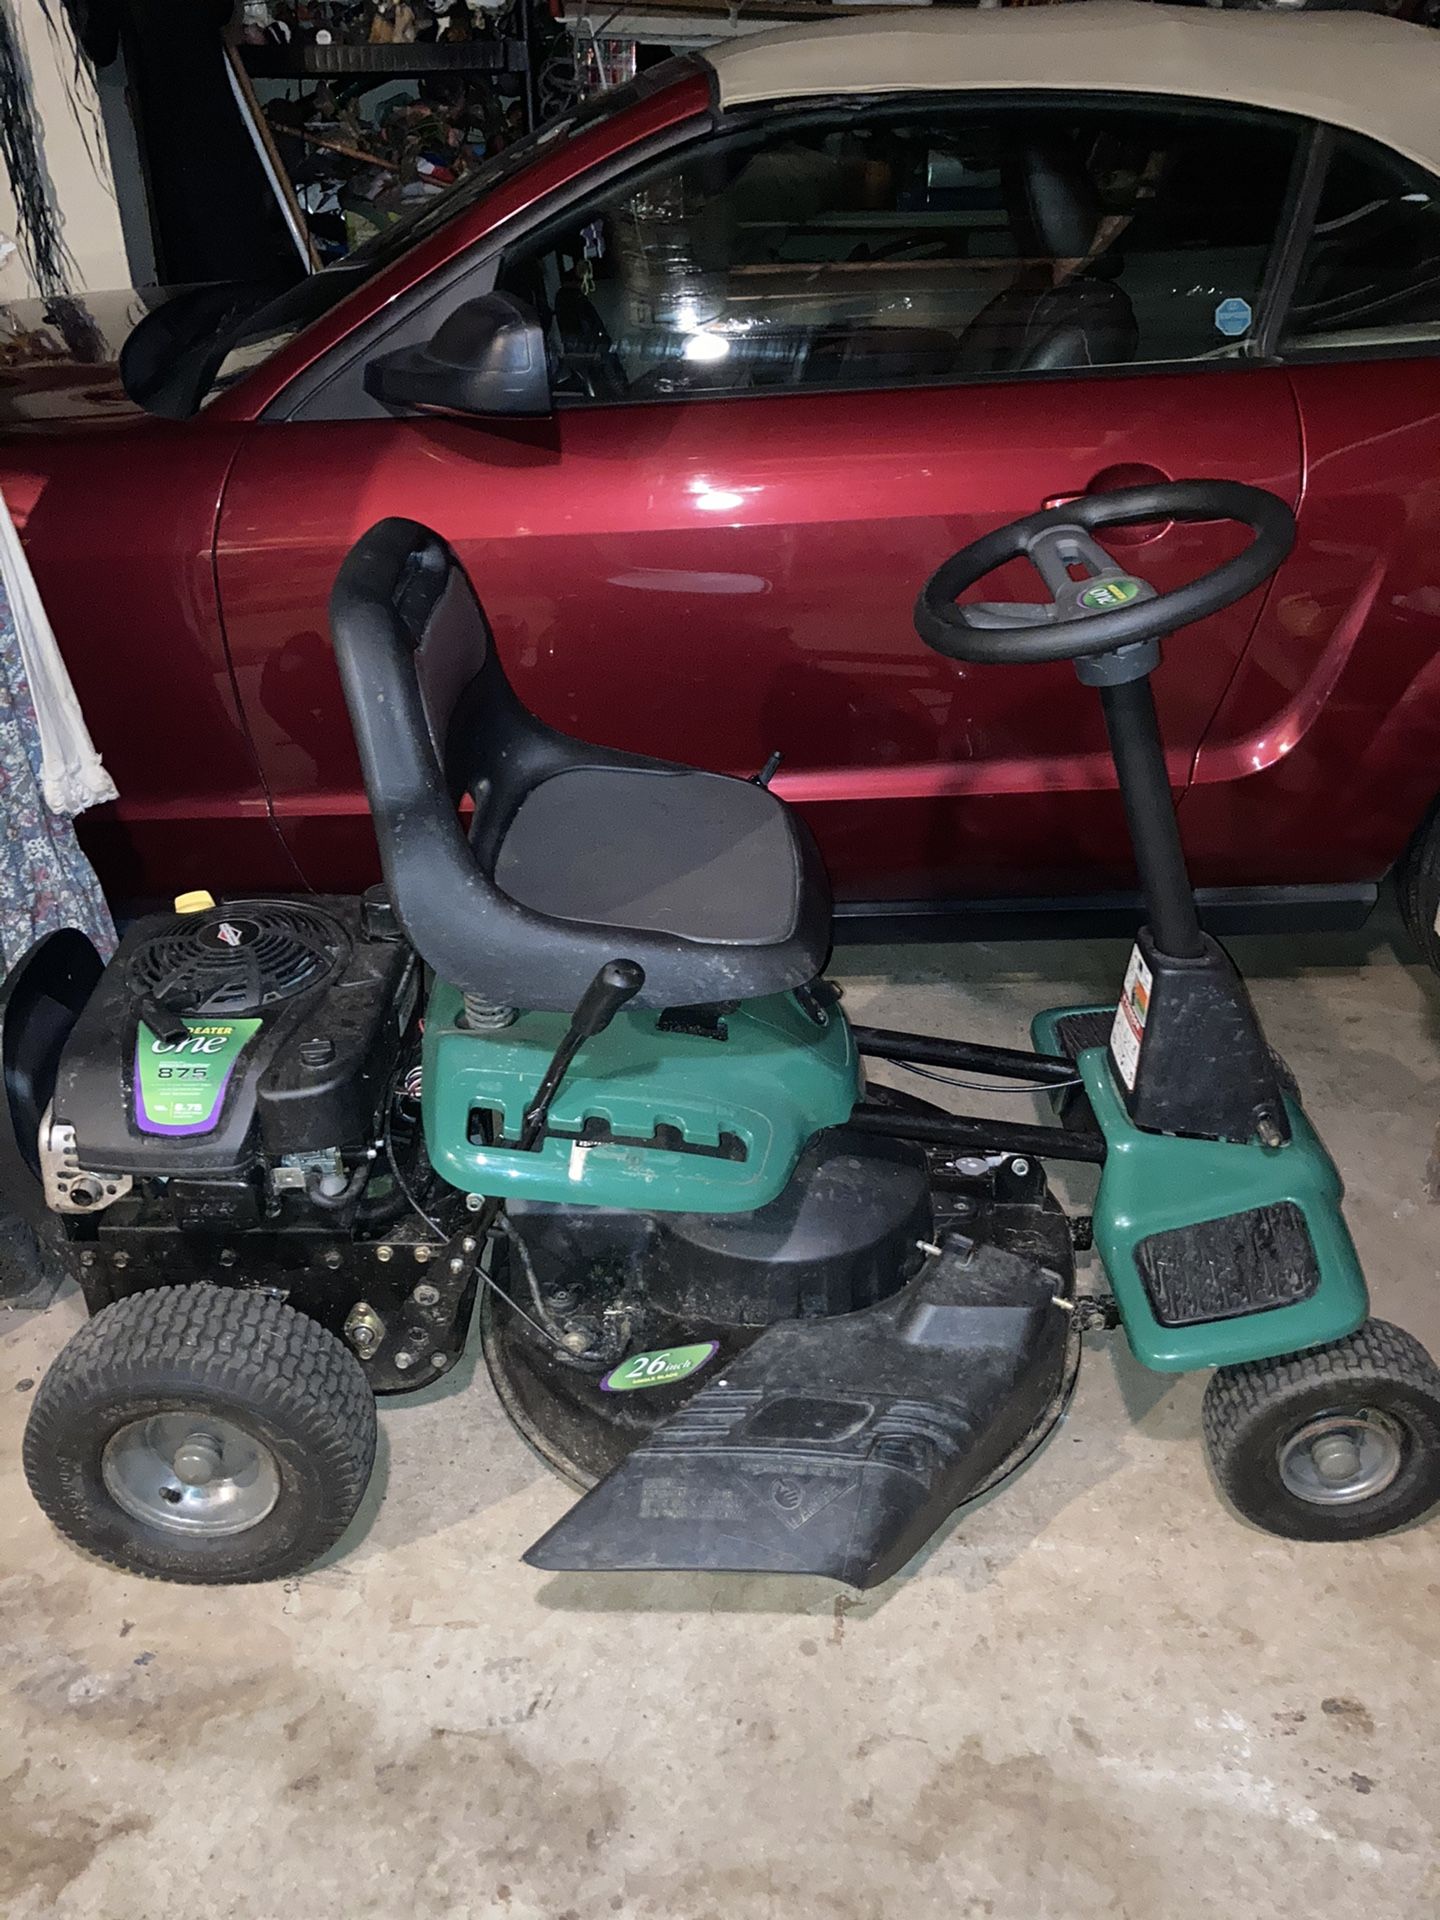 Weed eater Riding Mower